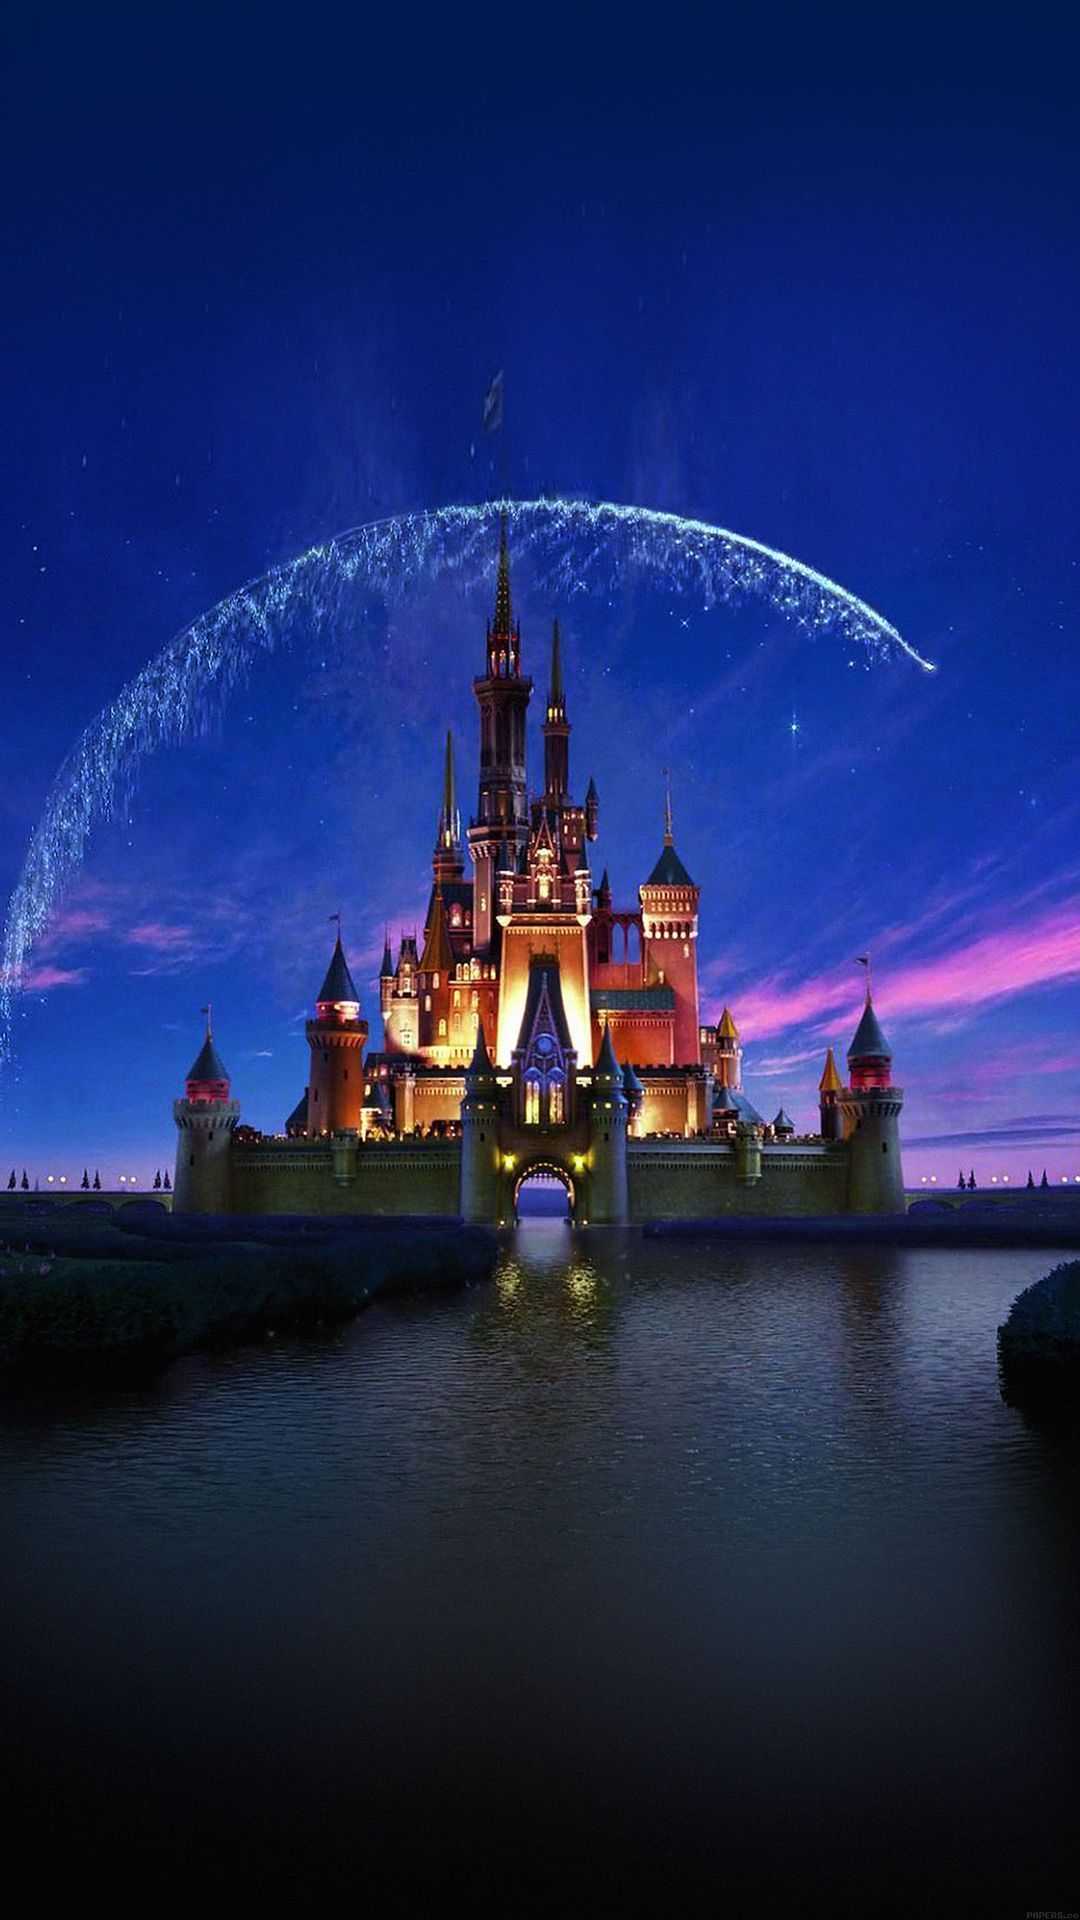 Disney castle wallpaper for your iPhone 6 from Everpix. - Castle